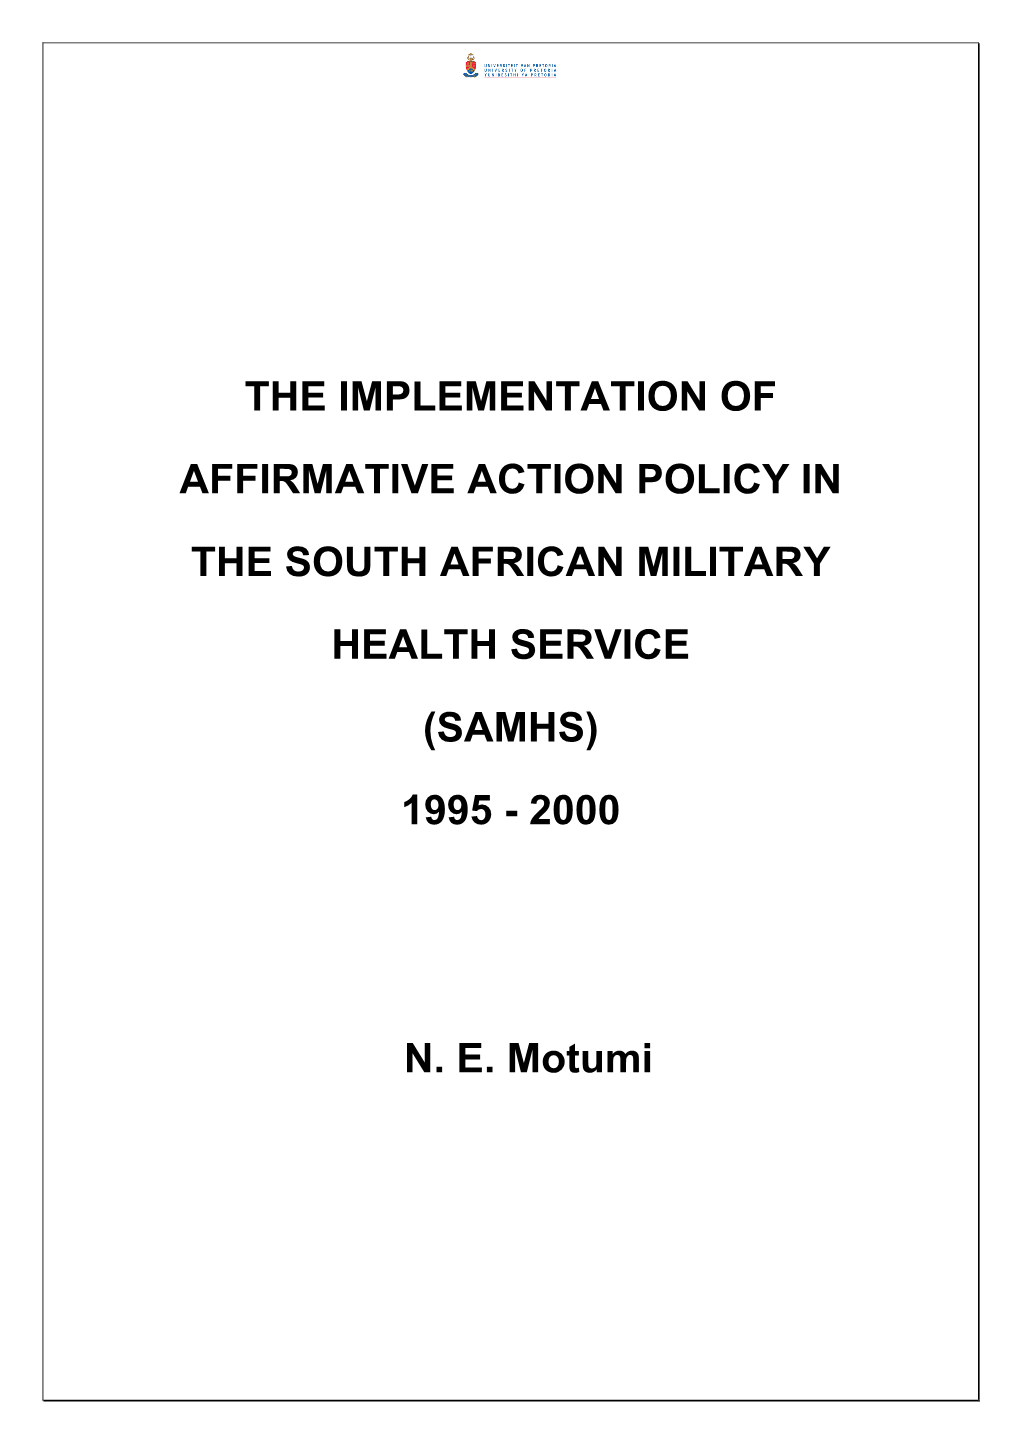 The Implementation of Affirmative Action Policy in the South African Military Health Services (Samhs) – 1995 to 2000